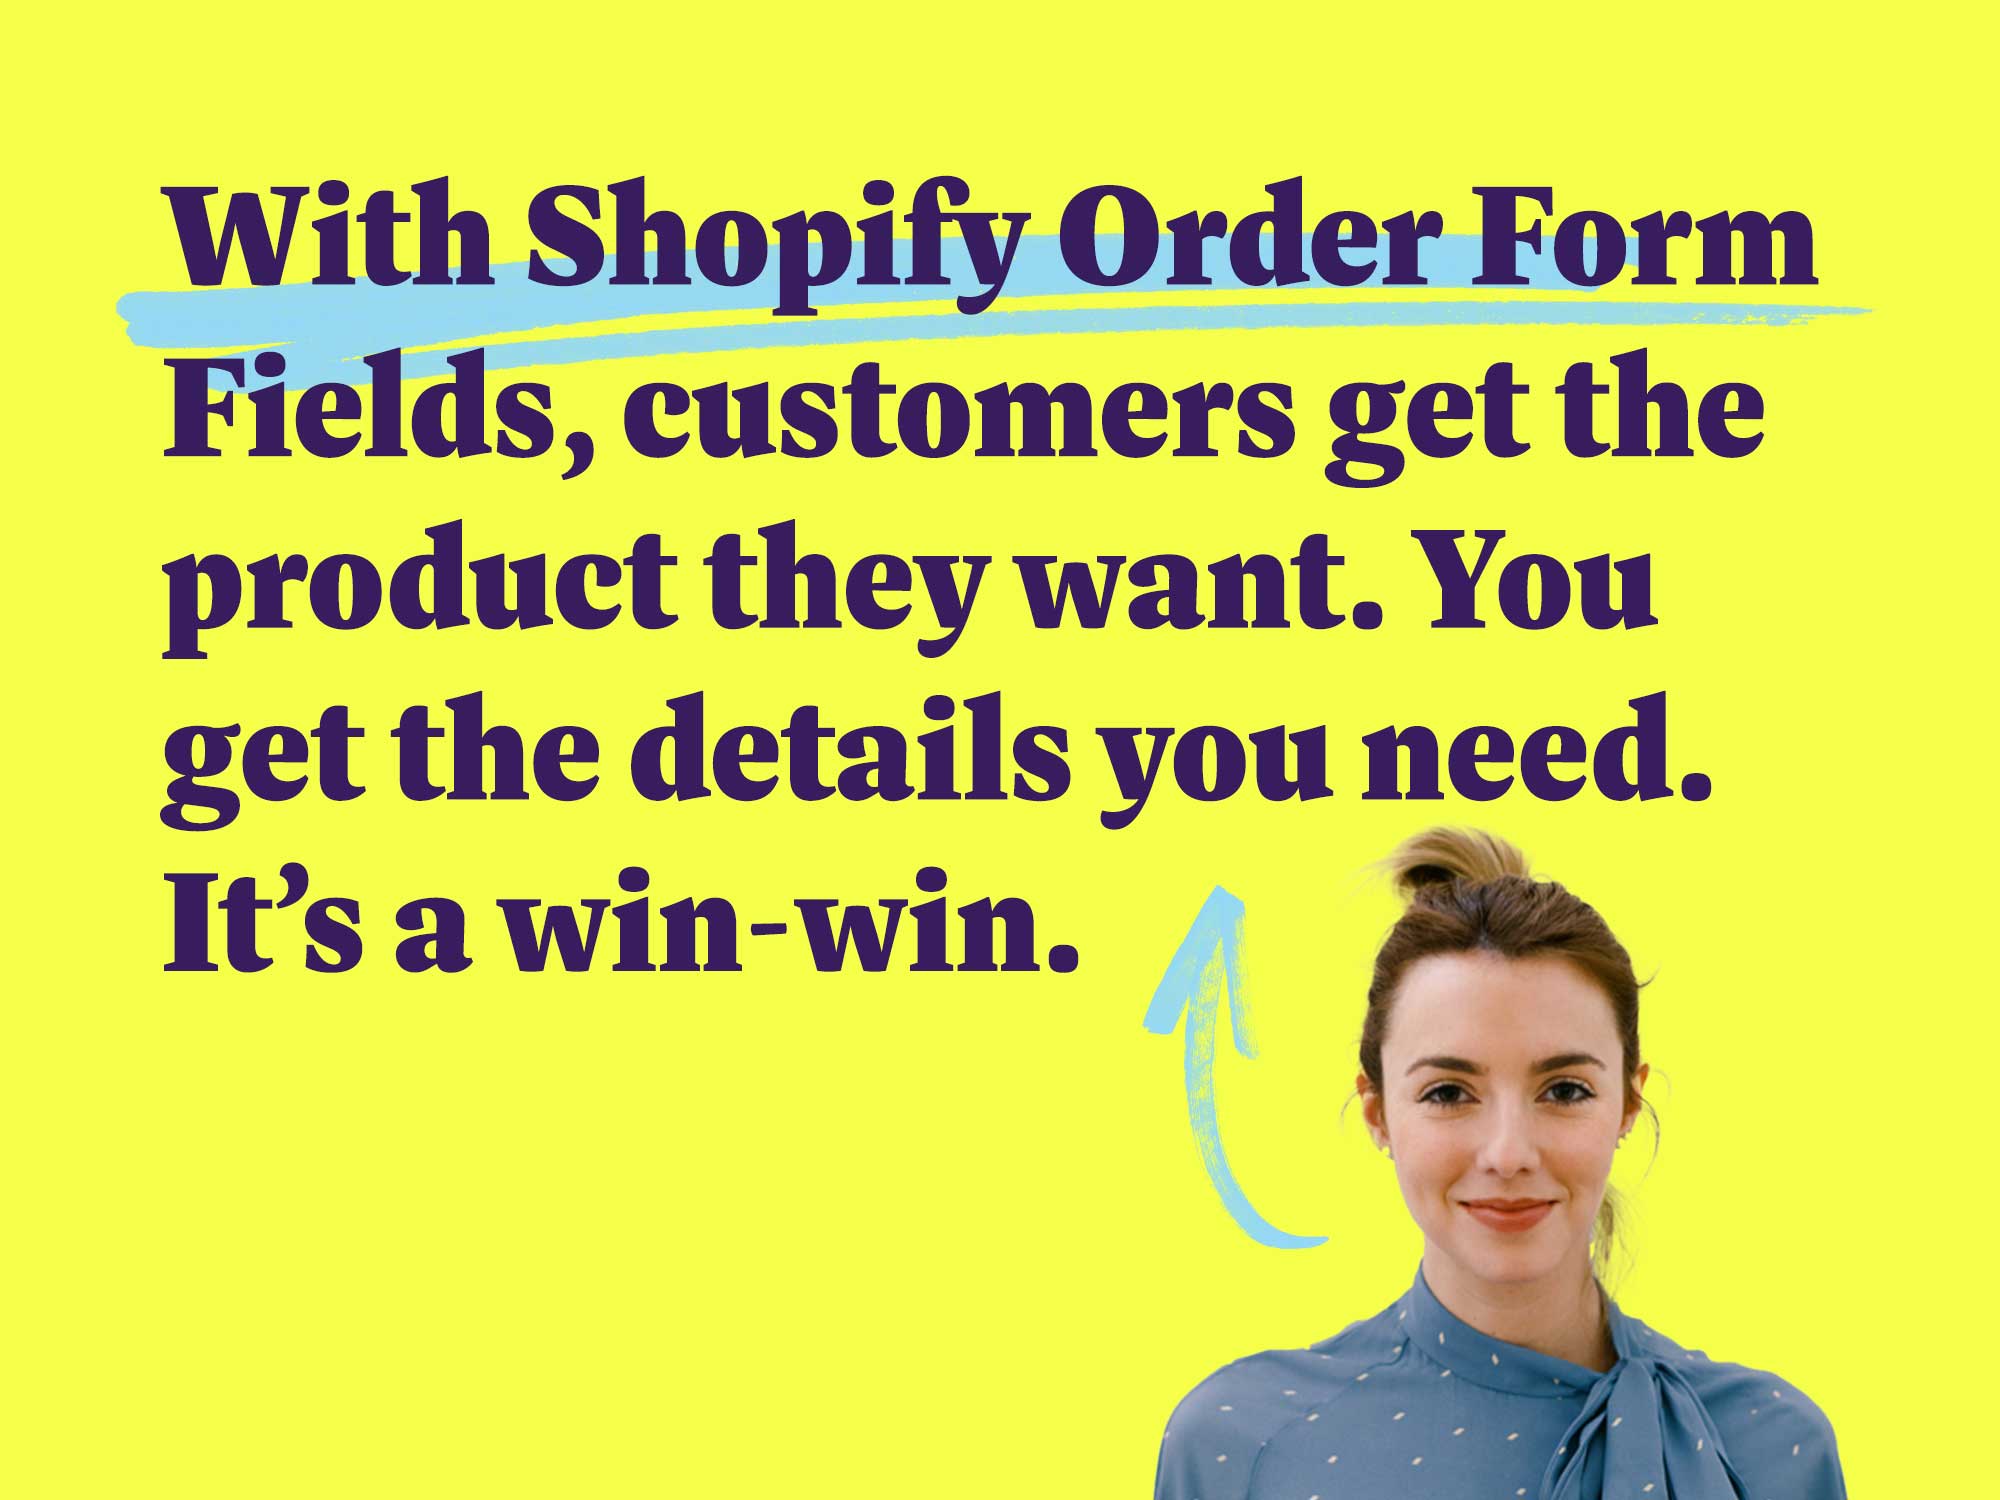 With Shopify Order Form Fields, customers get the product they want. You get the details you need. It’s a win-win.